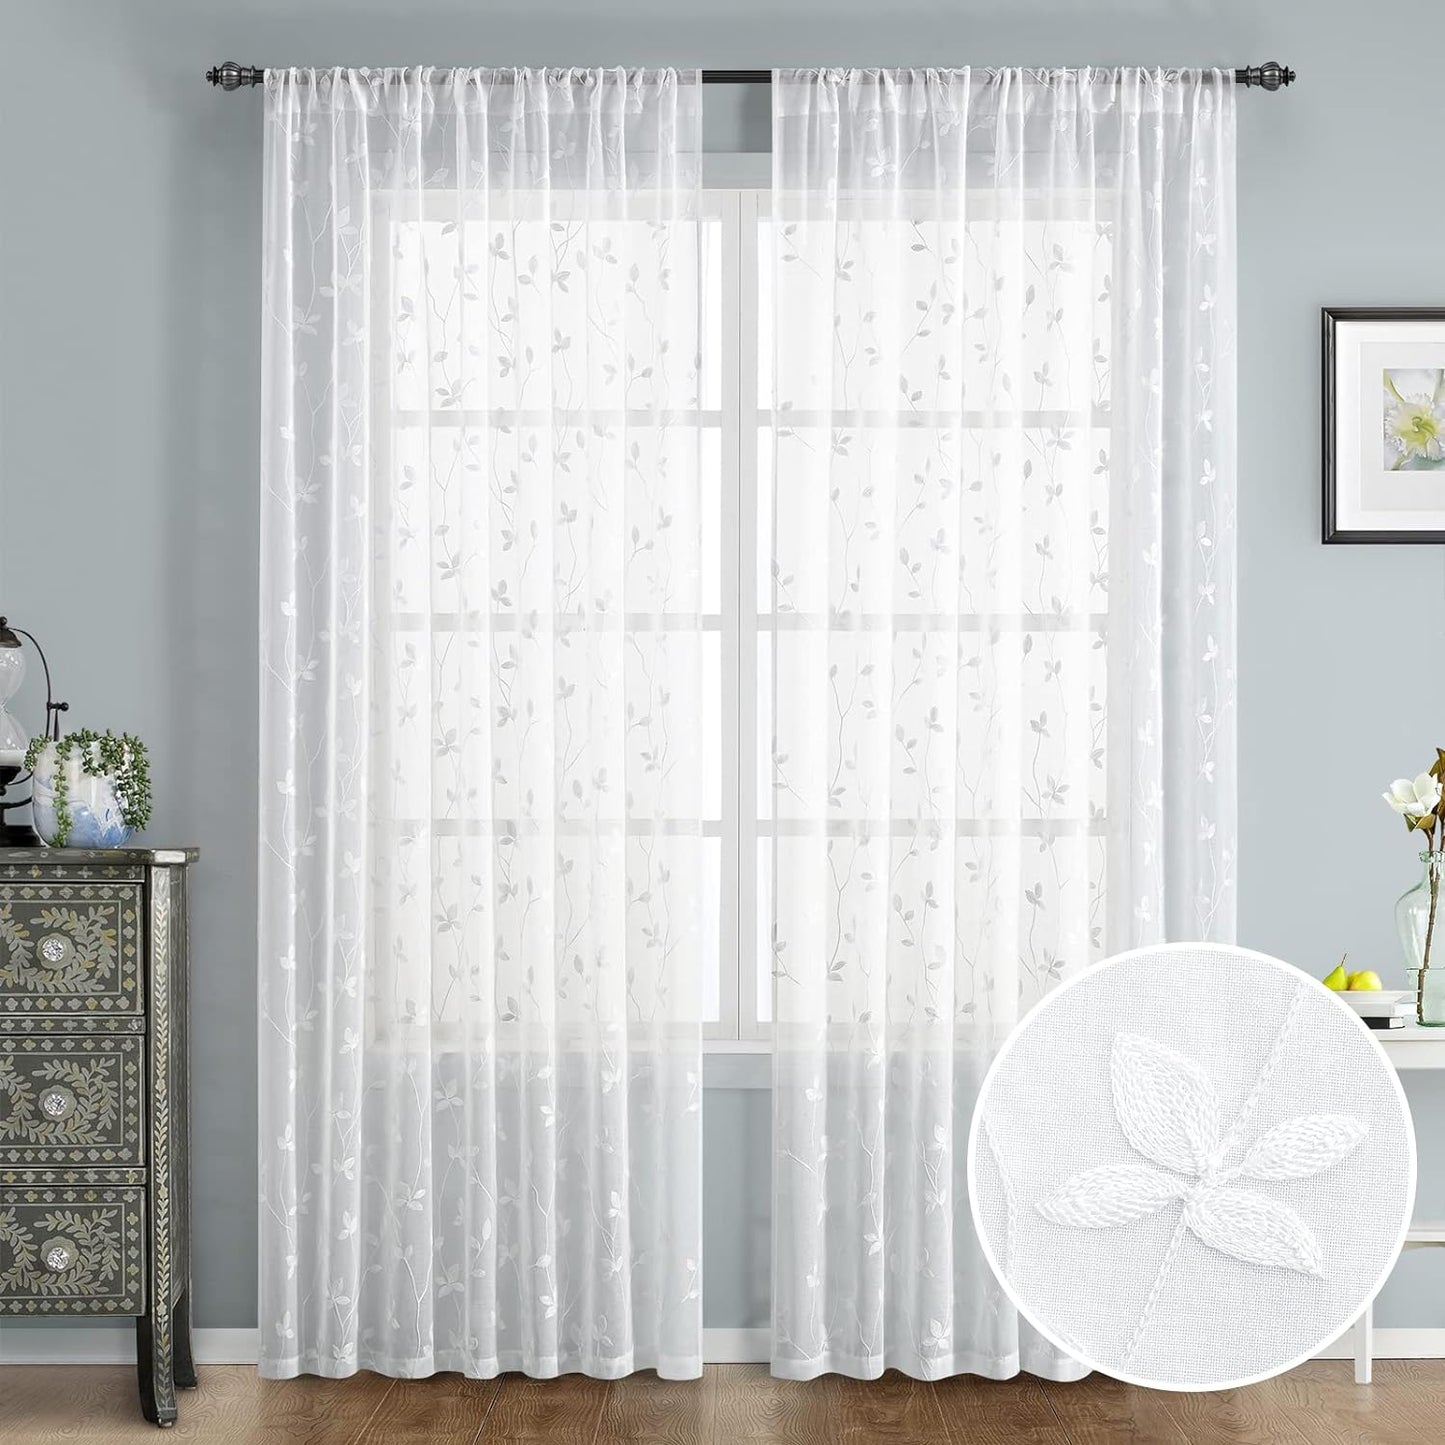 HOMEIDEAS Sage Green Sheer Curtains 52 X 63 Inches Length 2 Panels Embroidered Leaf Pattern Pocket Faux Linen Floral Semi Sheer Voile Window Curtains/Drapes for Bedroom Living Room  HOMEIDEAS Vine White W52" X L96" 